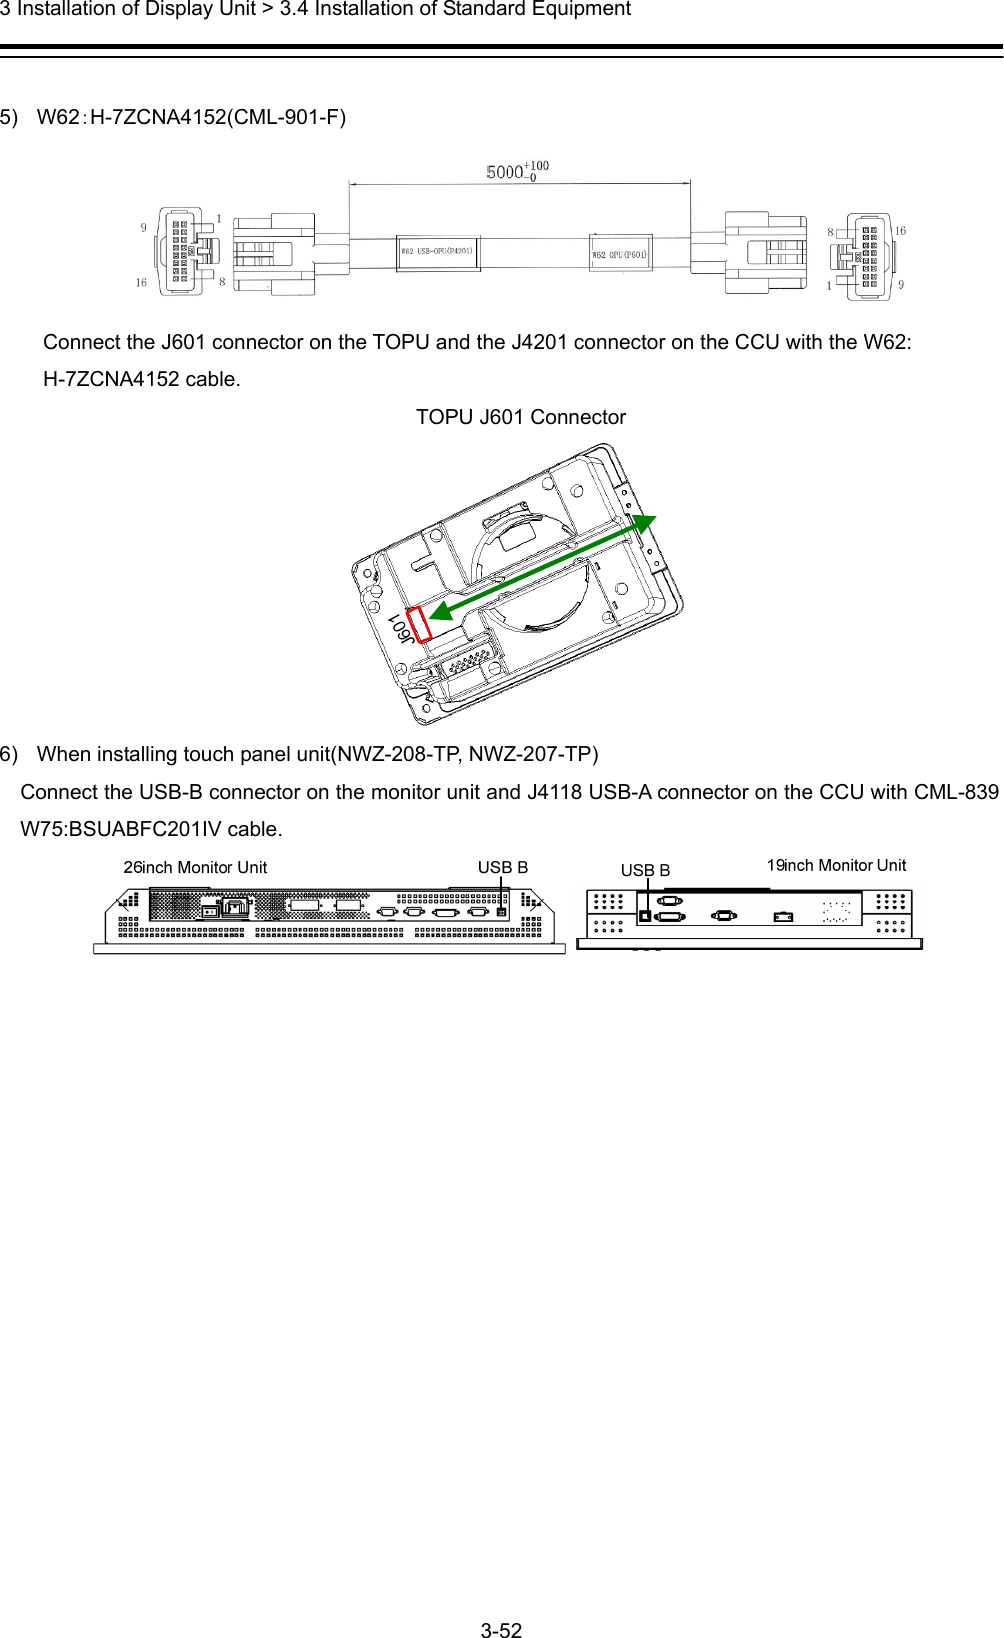  3 Installation of Display Unit &gt; 3.4 Installation of Standard Equipment 3-52   5) W62：H-7ZCNA4152(CML-901-F)  Connect the J601 connector on the TOPU and the J4201 connector on the CCU with the W62: H-7ZCNA4152 cable. TOPU J601 Connector  6)  When installing touch panel unit(NWZ-208-TP, NWZ-207-TP) Connect the USB-B connector on the monitor unit and J4118 USB-A connector on the CCU with CML-839 W75:BSUABFC201IV cable.     